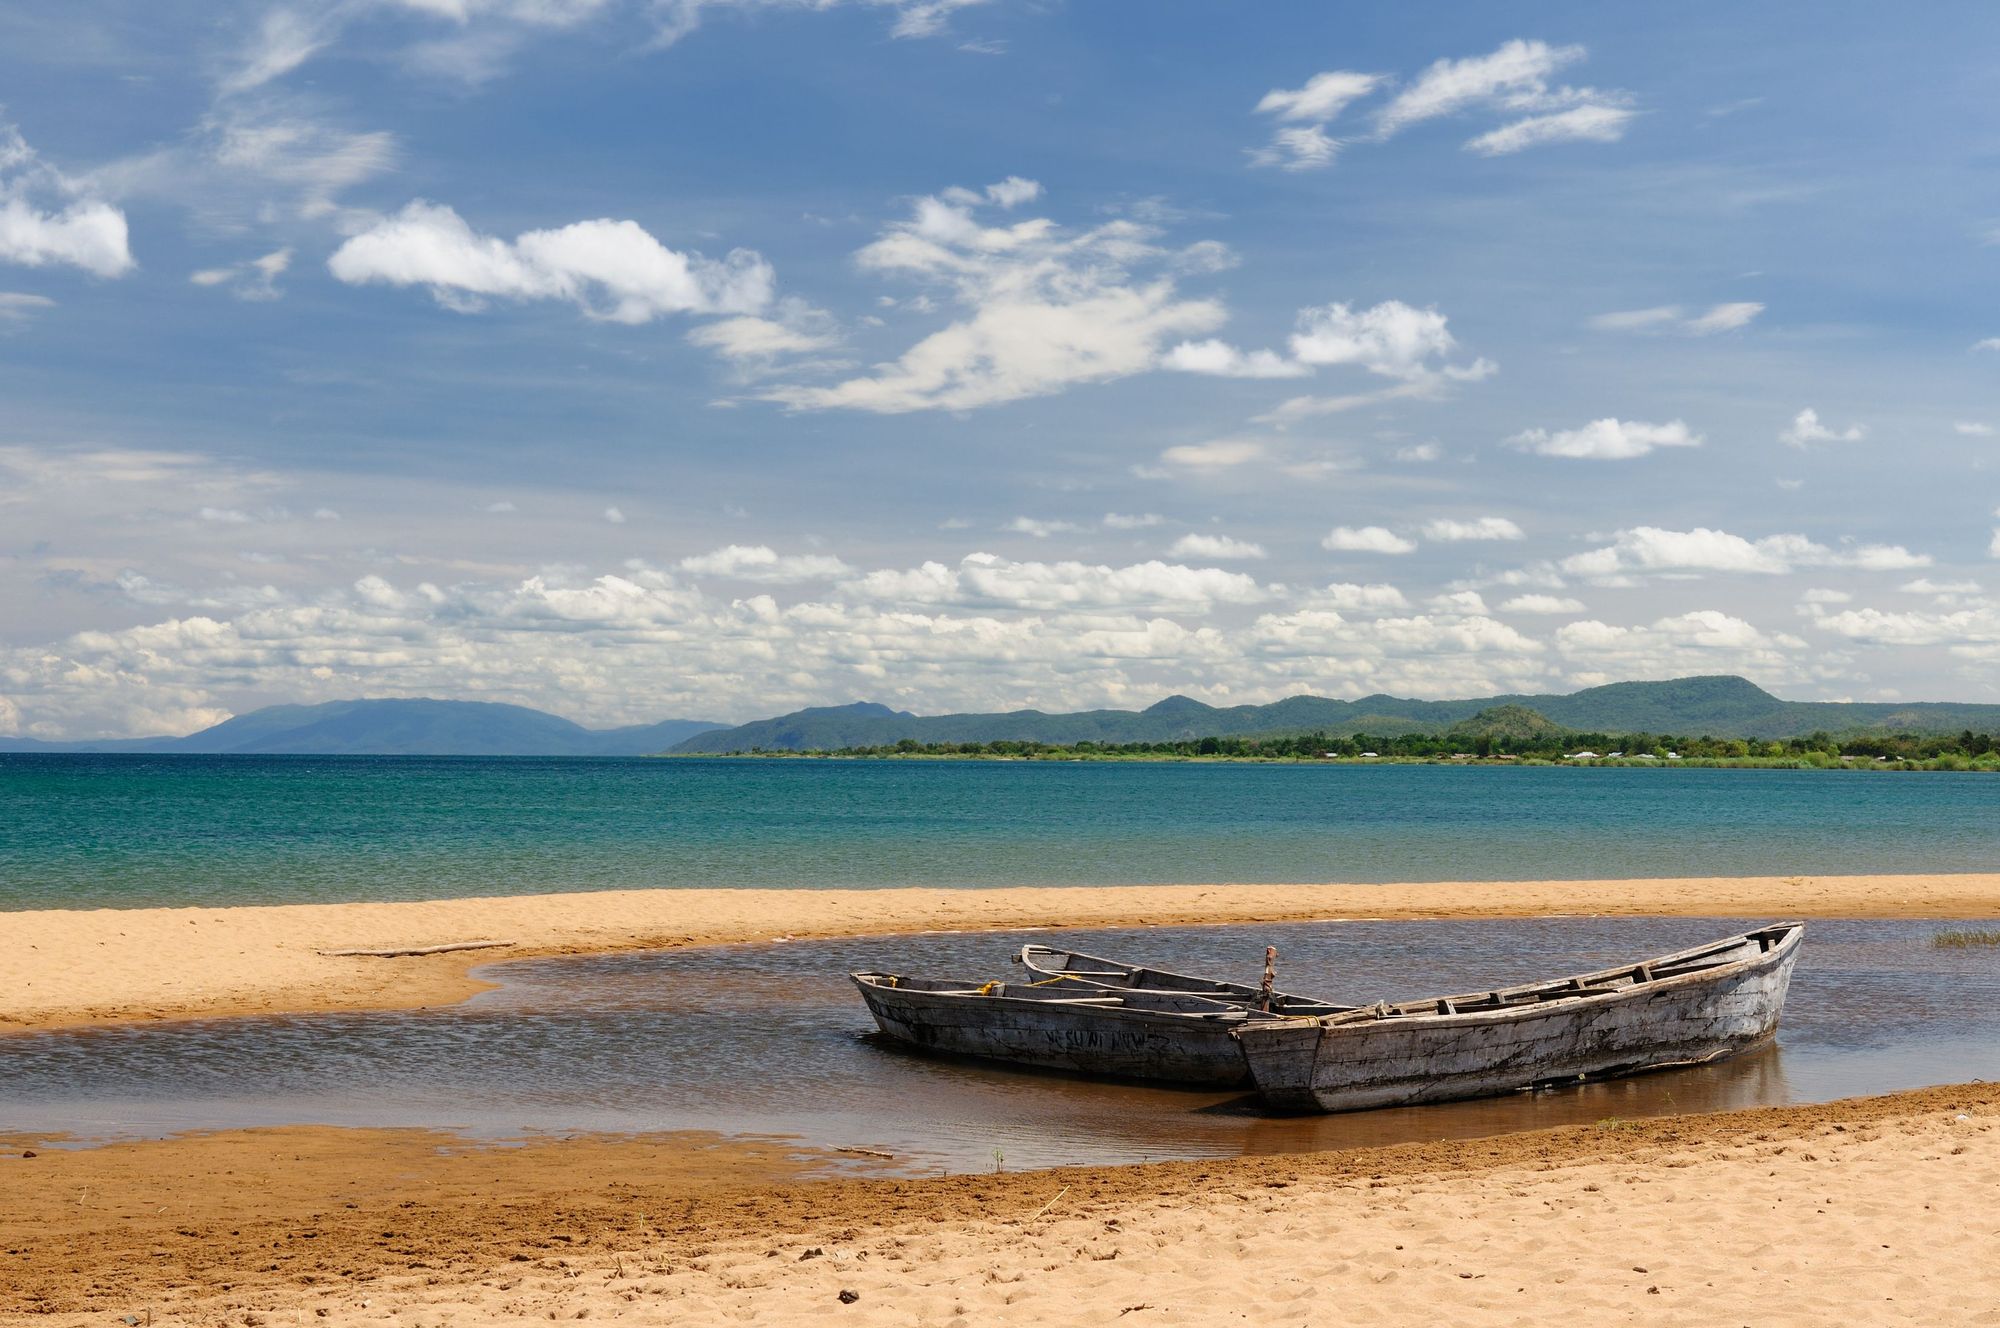 Three wooden boats tied up on the edge of Lake Tanganyika, one of Africa's Great Lakes. Photo: Getty